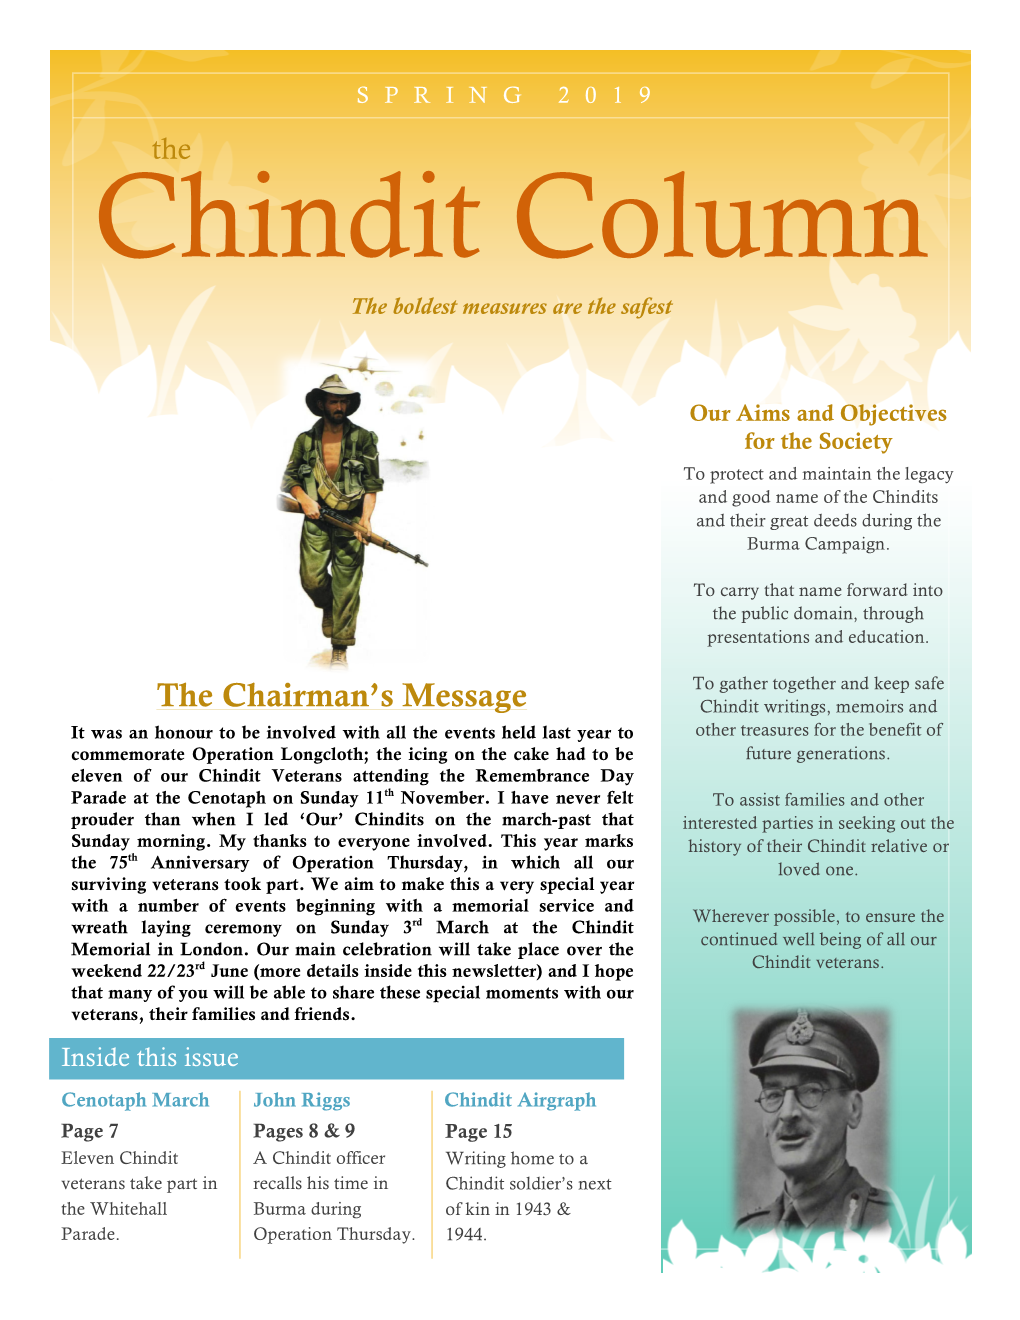 SPRING 2019 the Chindit Column the Boldest Measures Are the Safest